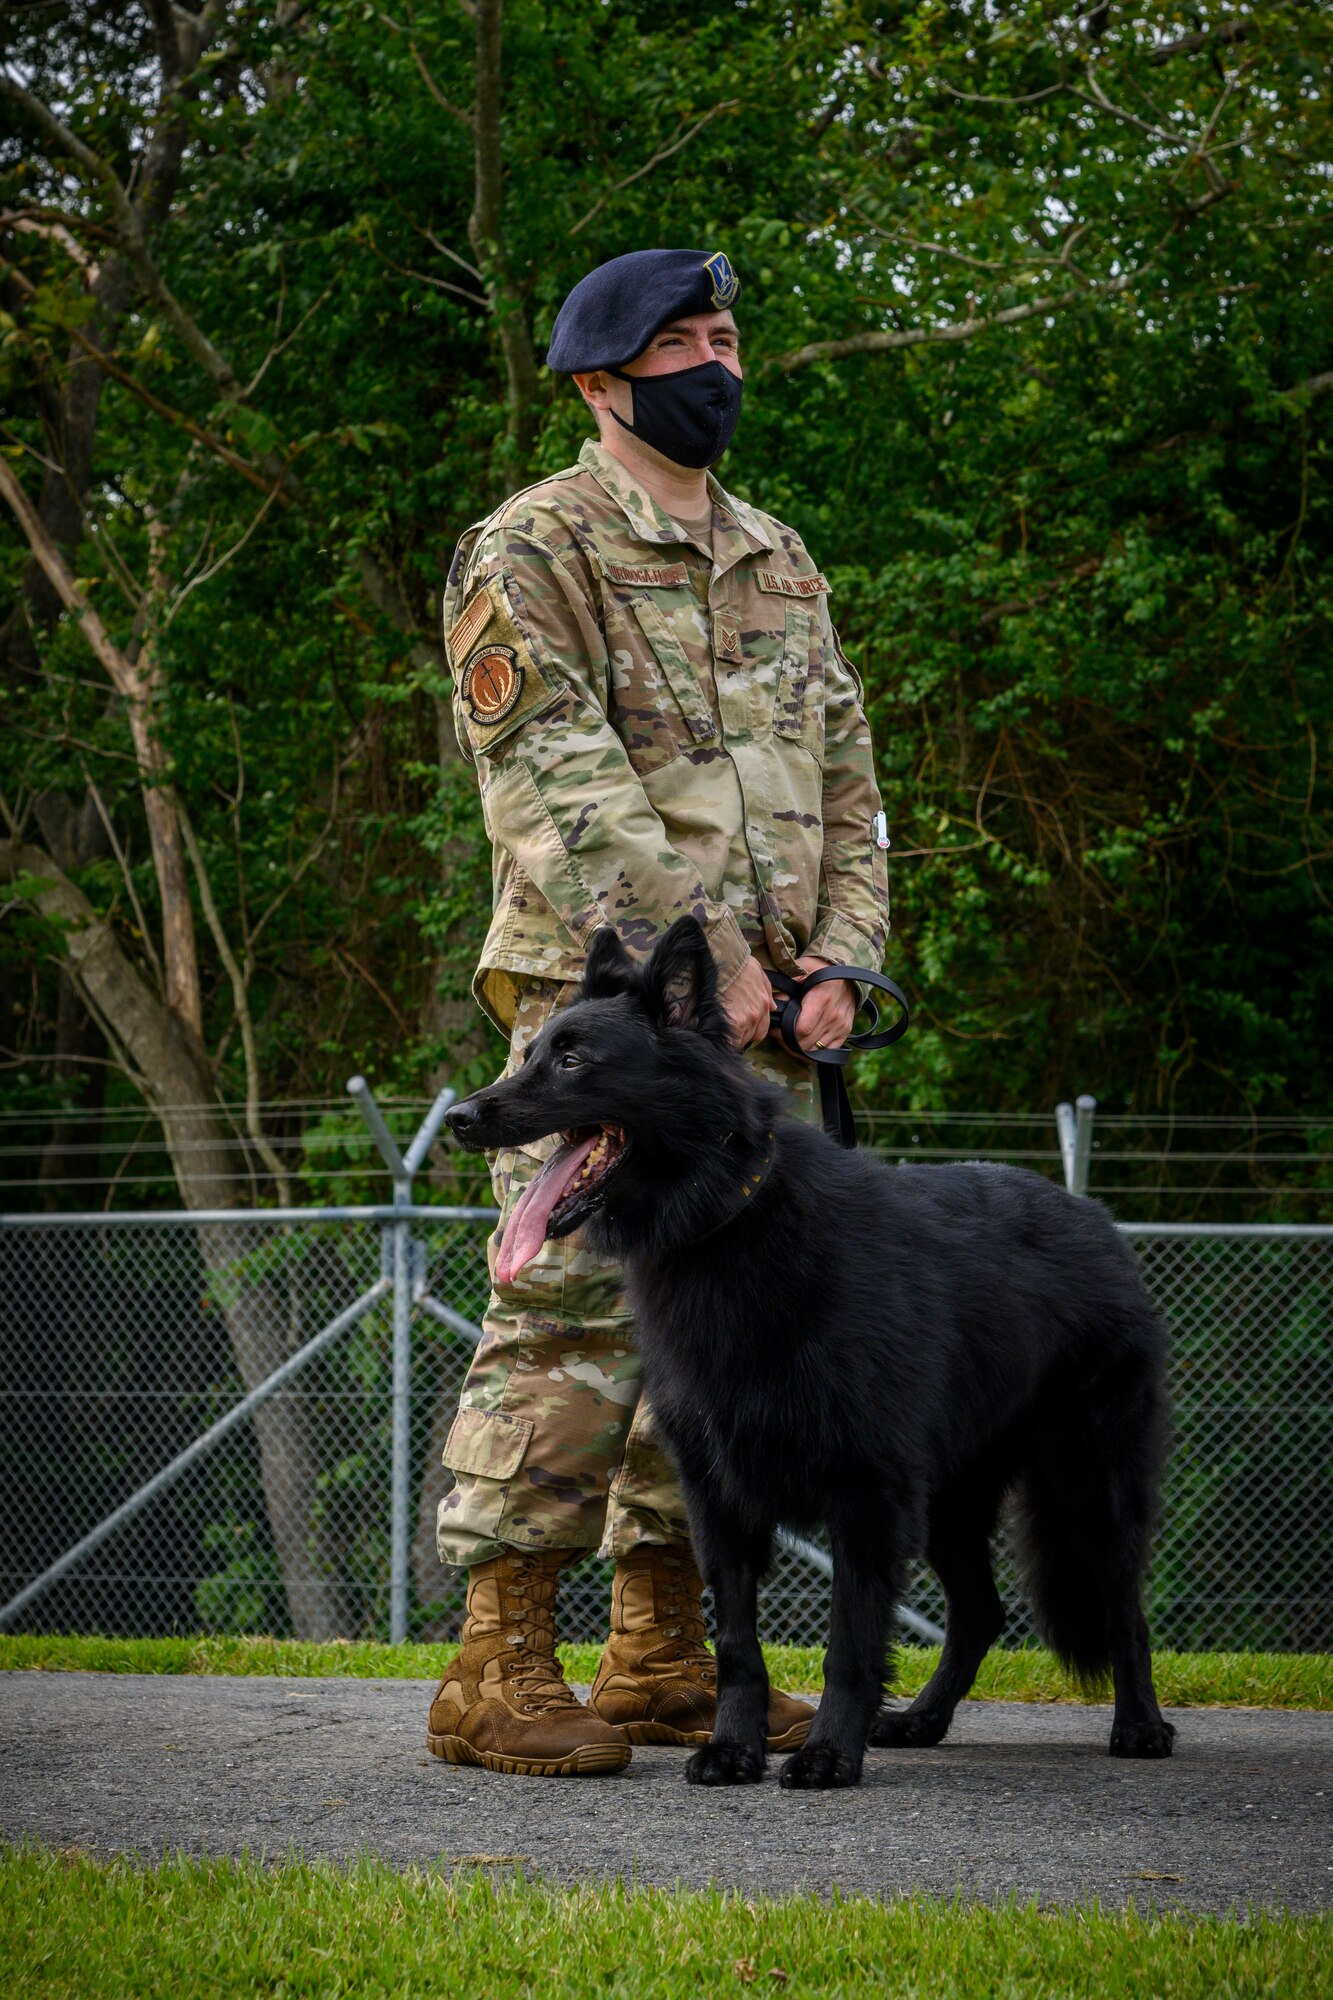 U.S. Air Force Staff Sgt. James Chiroboga-Flor, a 35th Security Forces Squadron military working dog handler, stands with his MWD, Cento, before a demonstration at Misawa Air Base, Japan, Sept. 17, 2020. Working dog handlers with the 35th Security Forces Squadron's K-9 unit display the skills of their dogs during a demonstration for Chief Master Sgt. Rick Winegardner Jr, the U.S. Forces Japan command chief. The dogs train on how to detect explosives and narcotics as well as perform controlled aggression tactics when detaining suspects. (U.S. Air Force photo by Airman 1st Class China M. Shock)